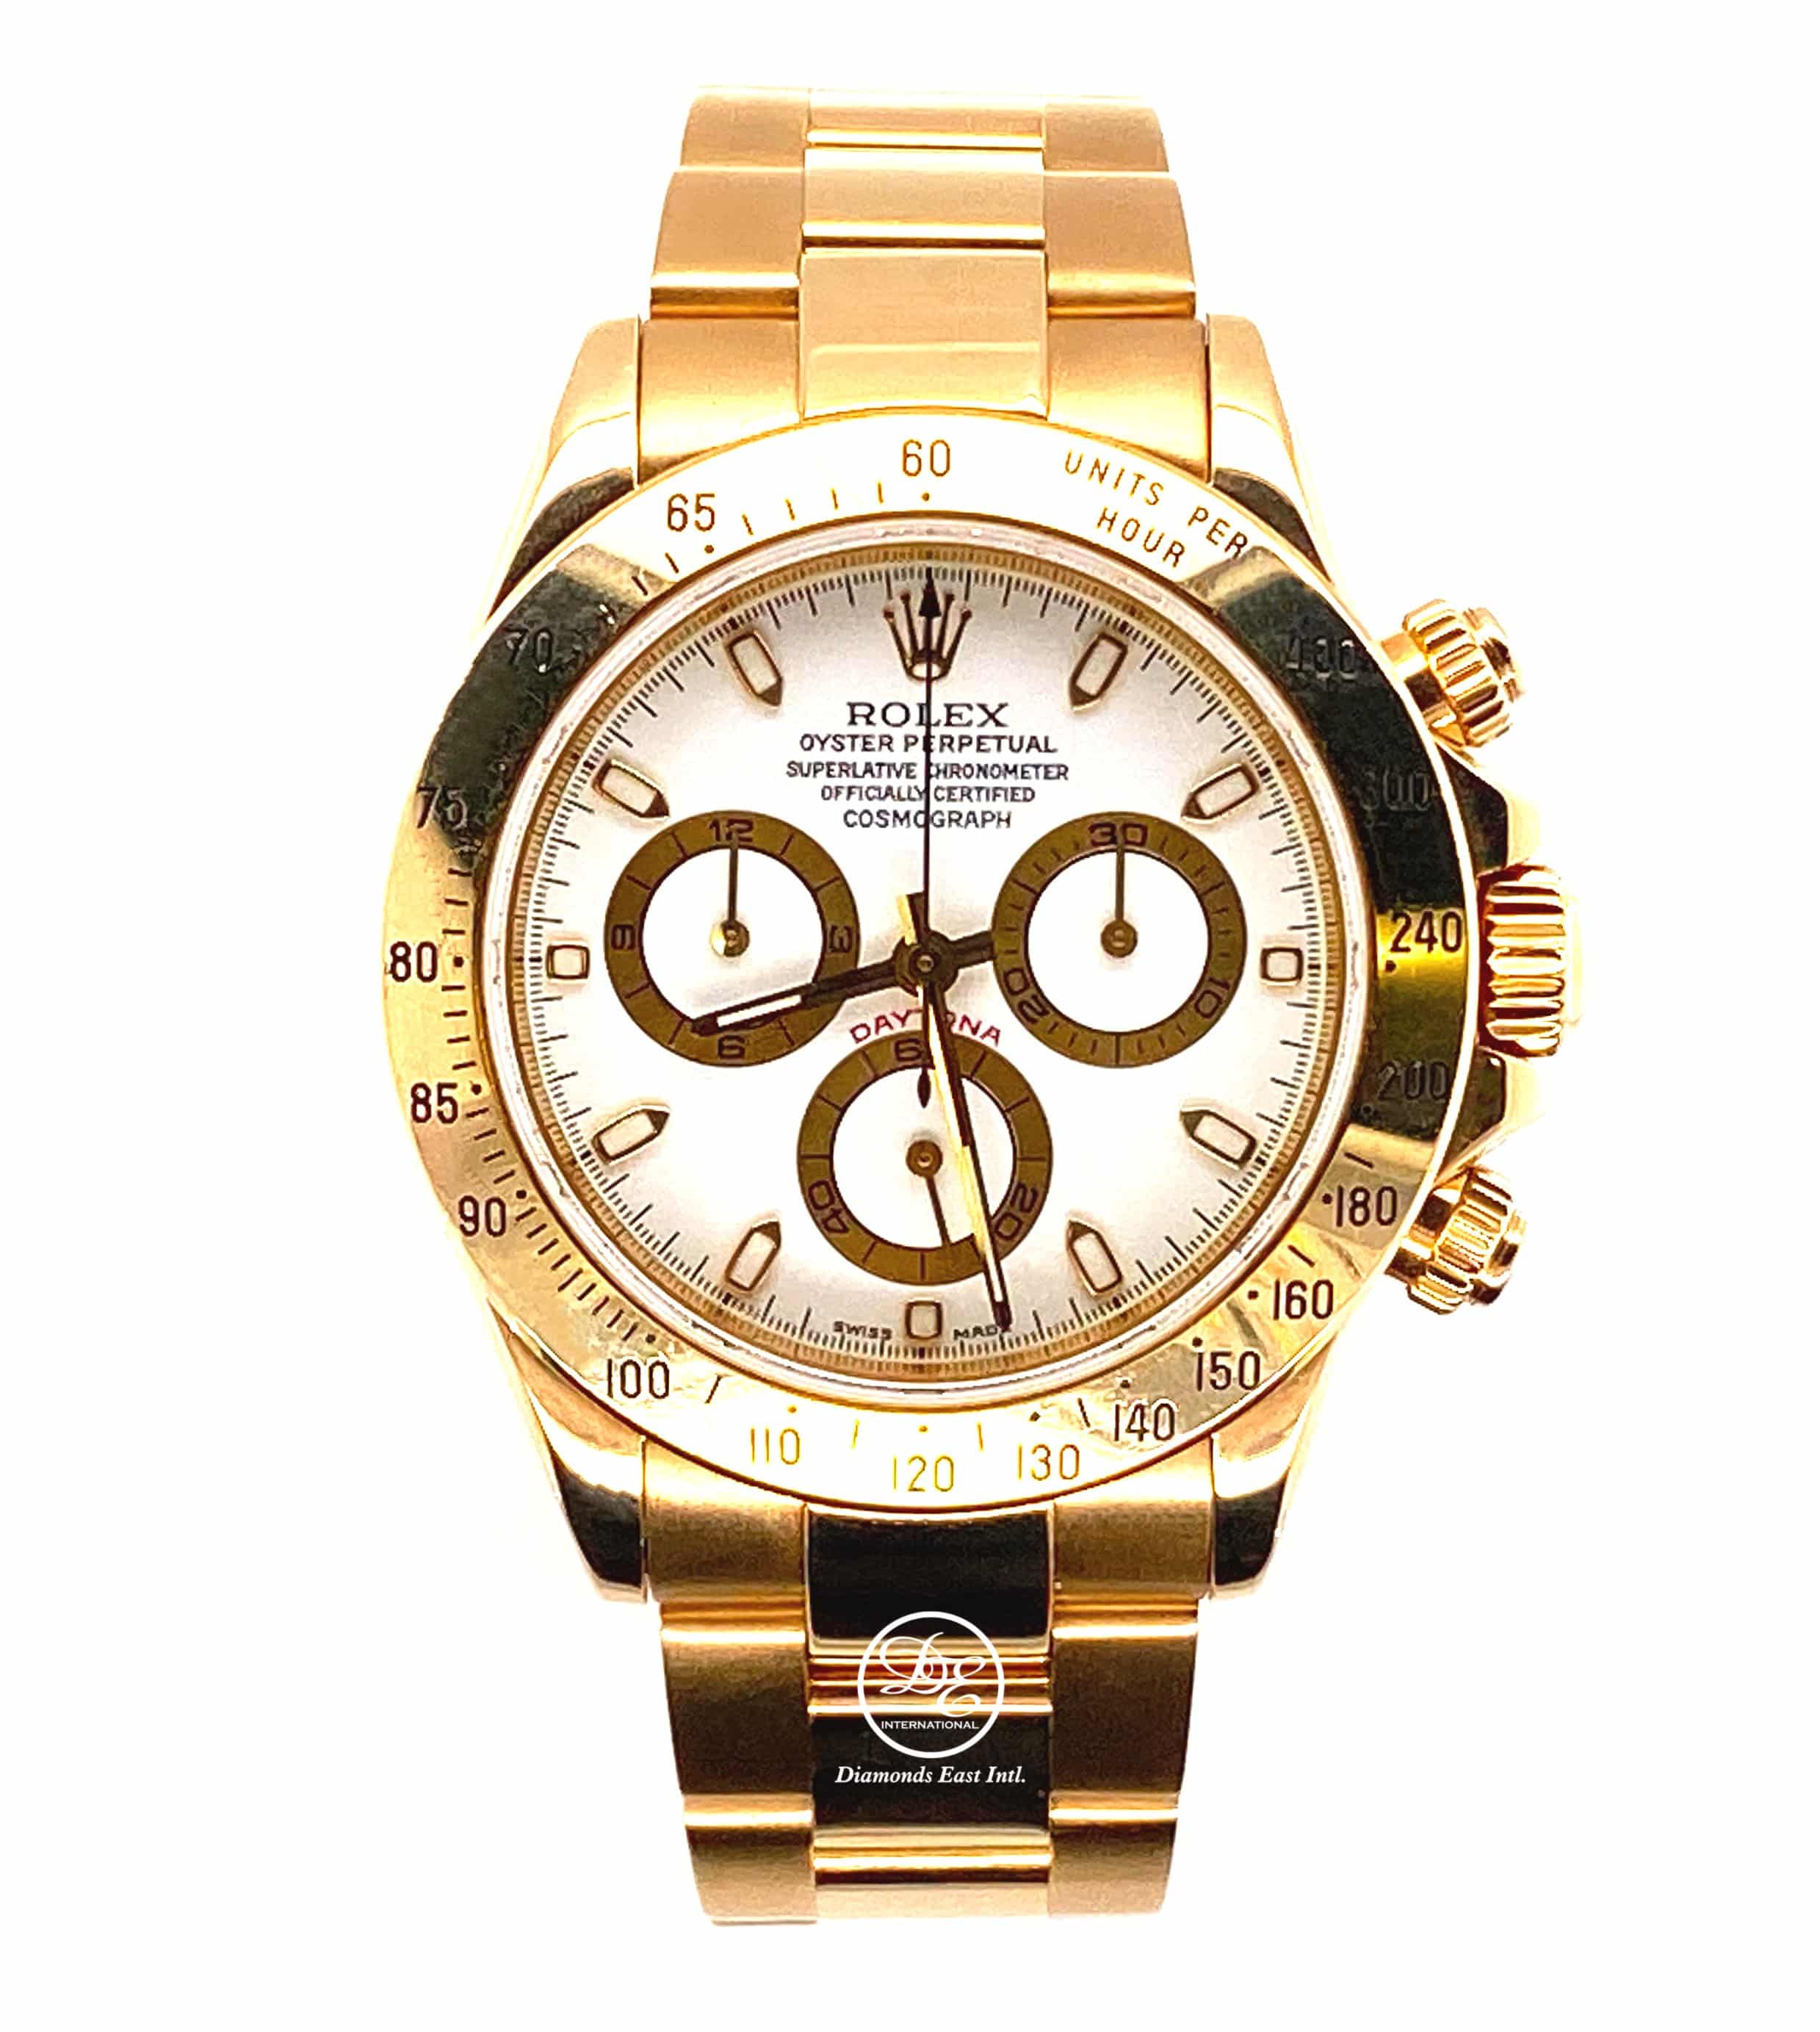 Majroe Sovesal Misbruge Rolex Daytona 116528 18K Yellow Gold White Dial Oyster Perpetual Cosmograph  Watch | Diamonds East Intl.